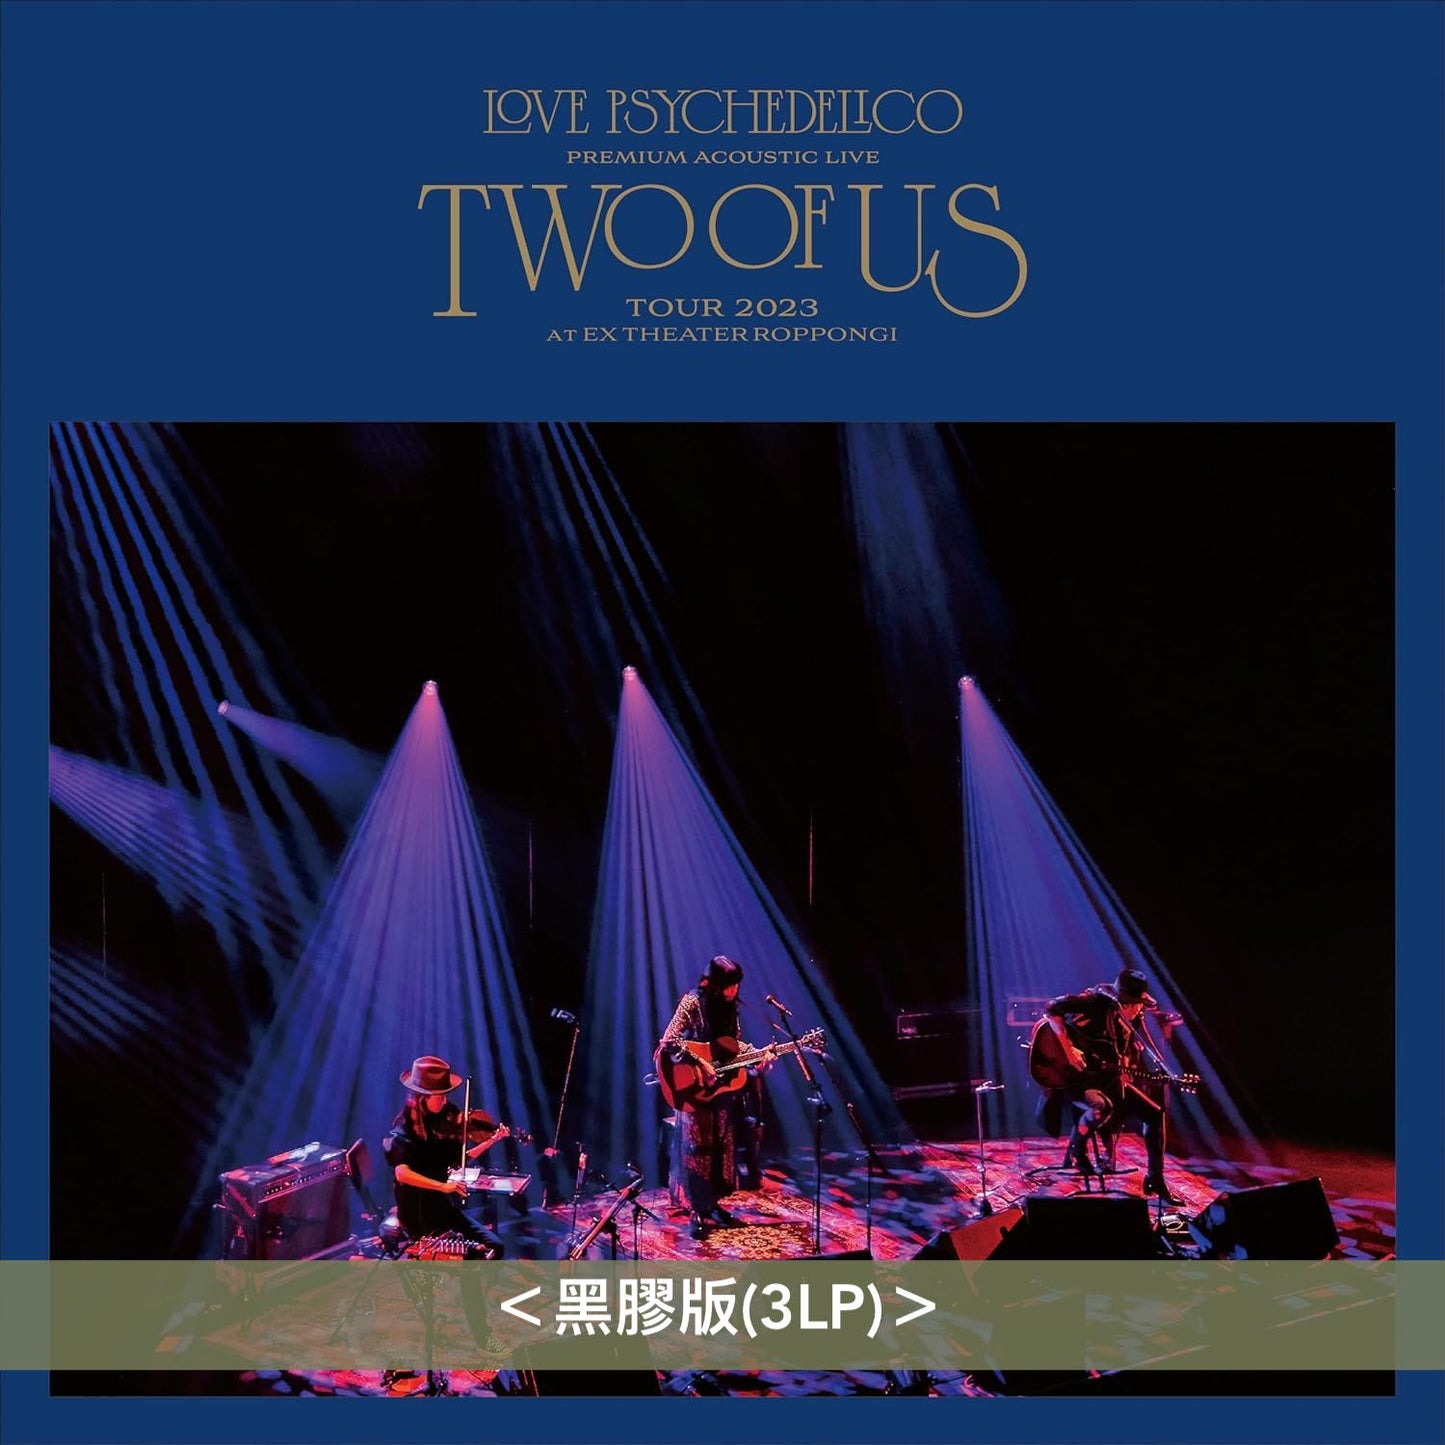 LOVE PSYCHEDELICO Live Blu-ray／CD／黑膠《Premium Acoustic Live "TWO OF US" Tour 2023 at EX THEATER ROPPONGI》＜Blu-ray／3CD／3LP＞